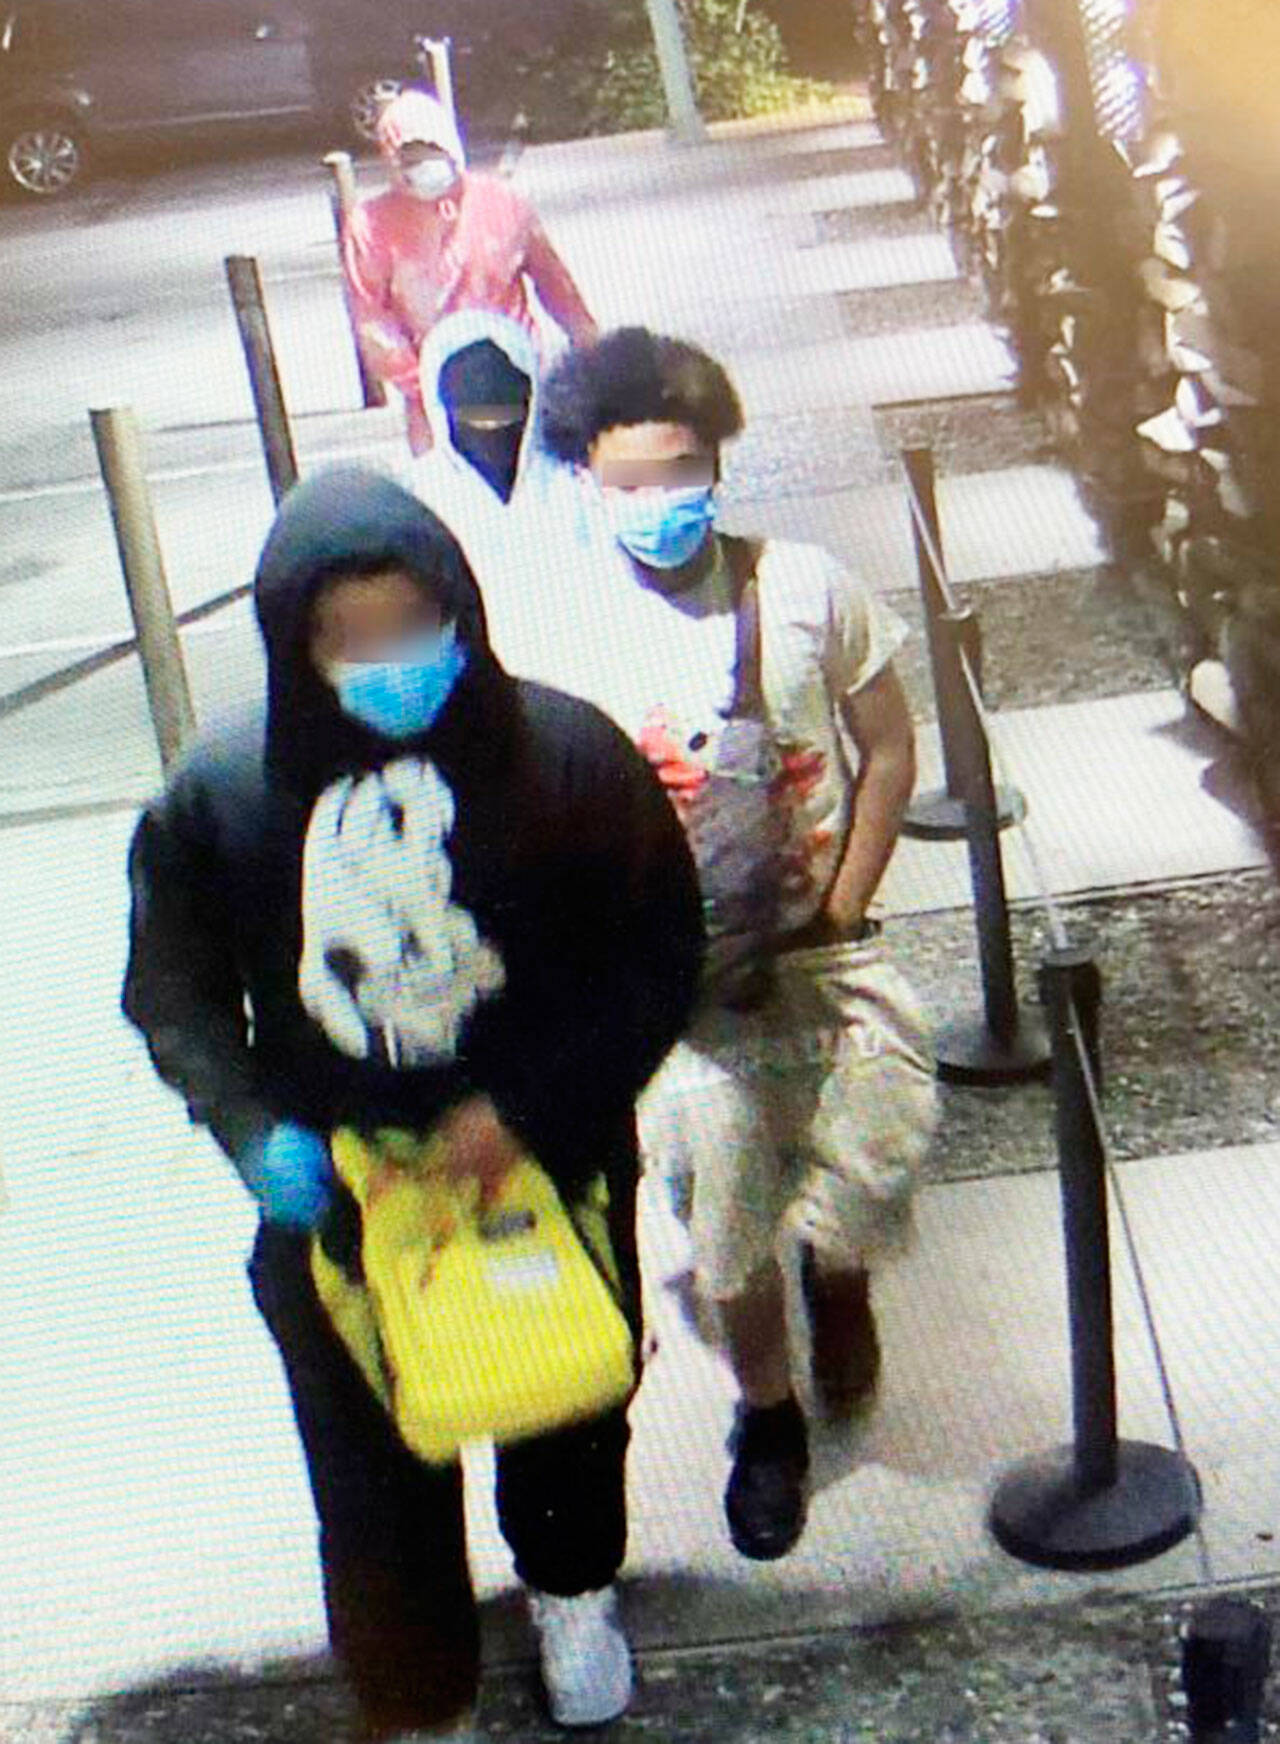 Four males were captured on video surveillance entering a Bellevue marijuana dispensary on the night of June 5. The four were arrested for investigation of armed robbery about two hours later on June 6 at a Kent apartment complex. COURTESY IMAGE, Bellevue Police